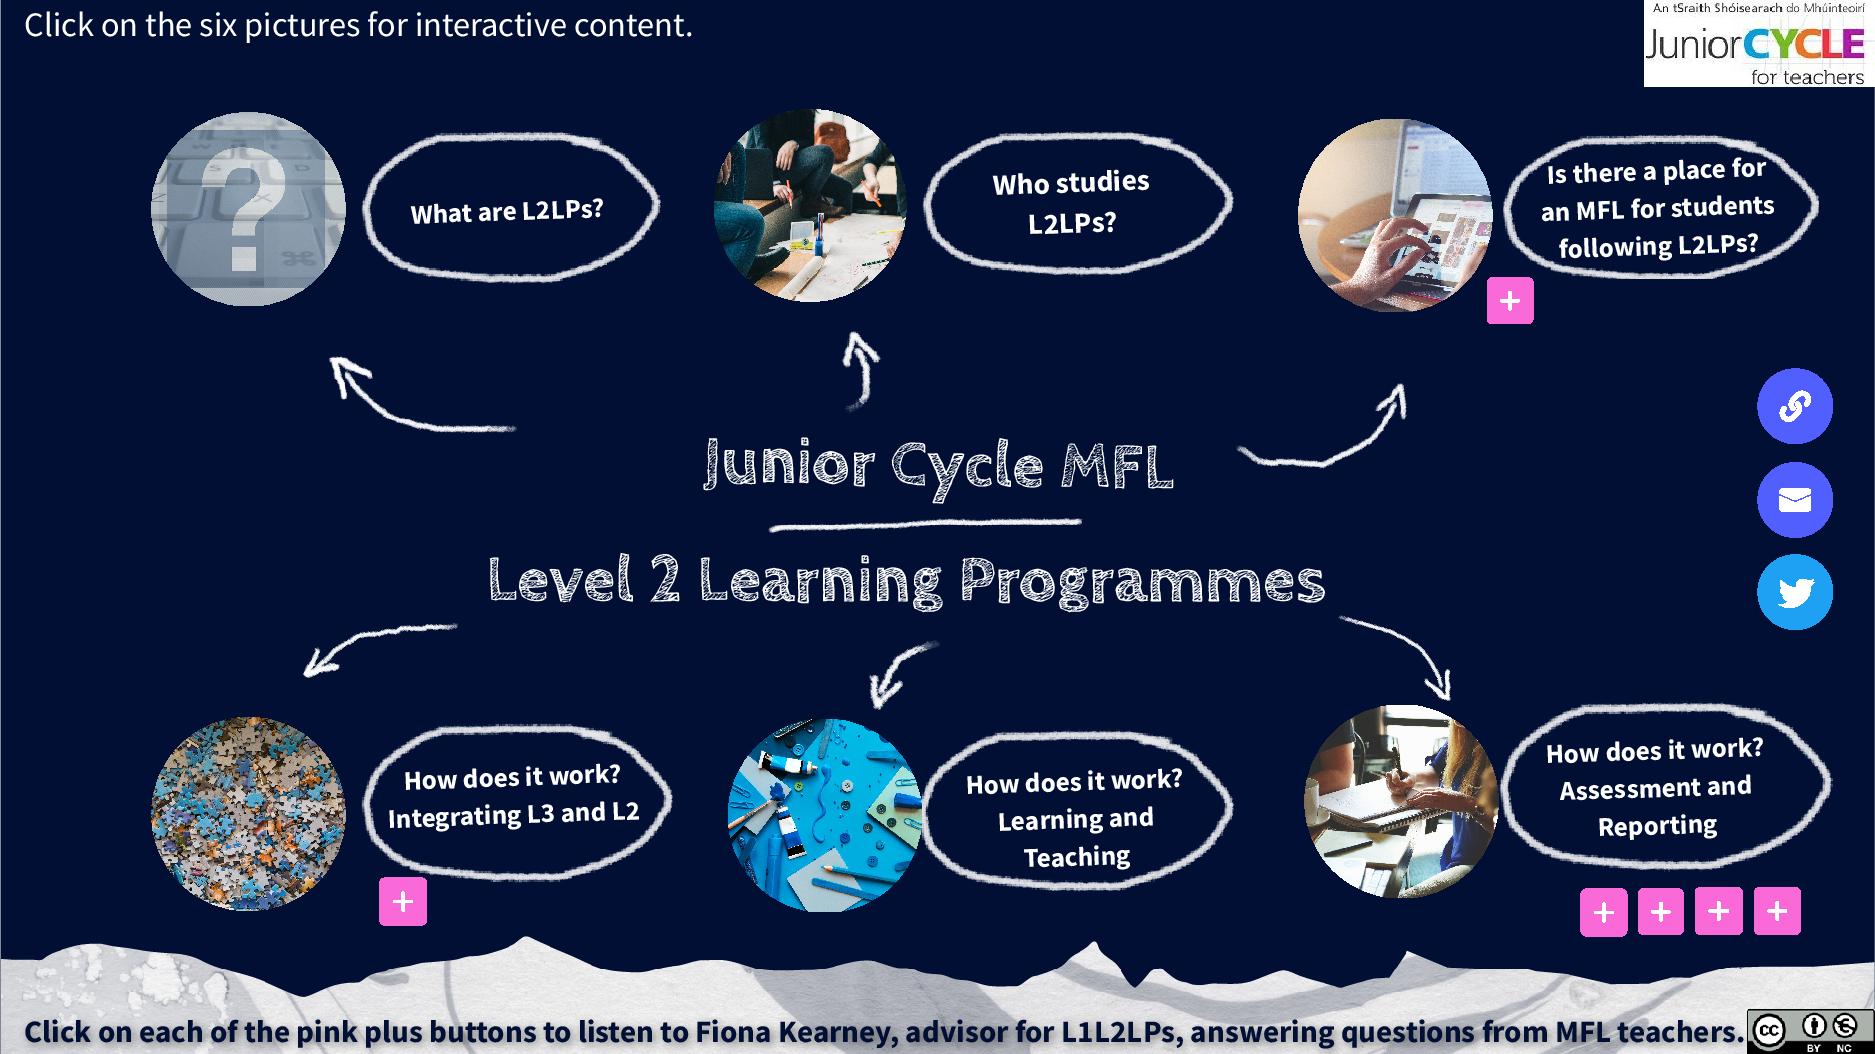 Further Developing our Understanding of Level 2 Learning Programmes (L2LPs) in MFL